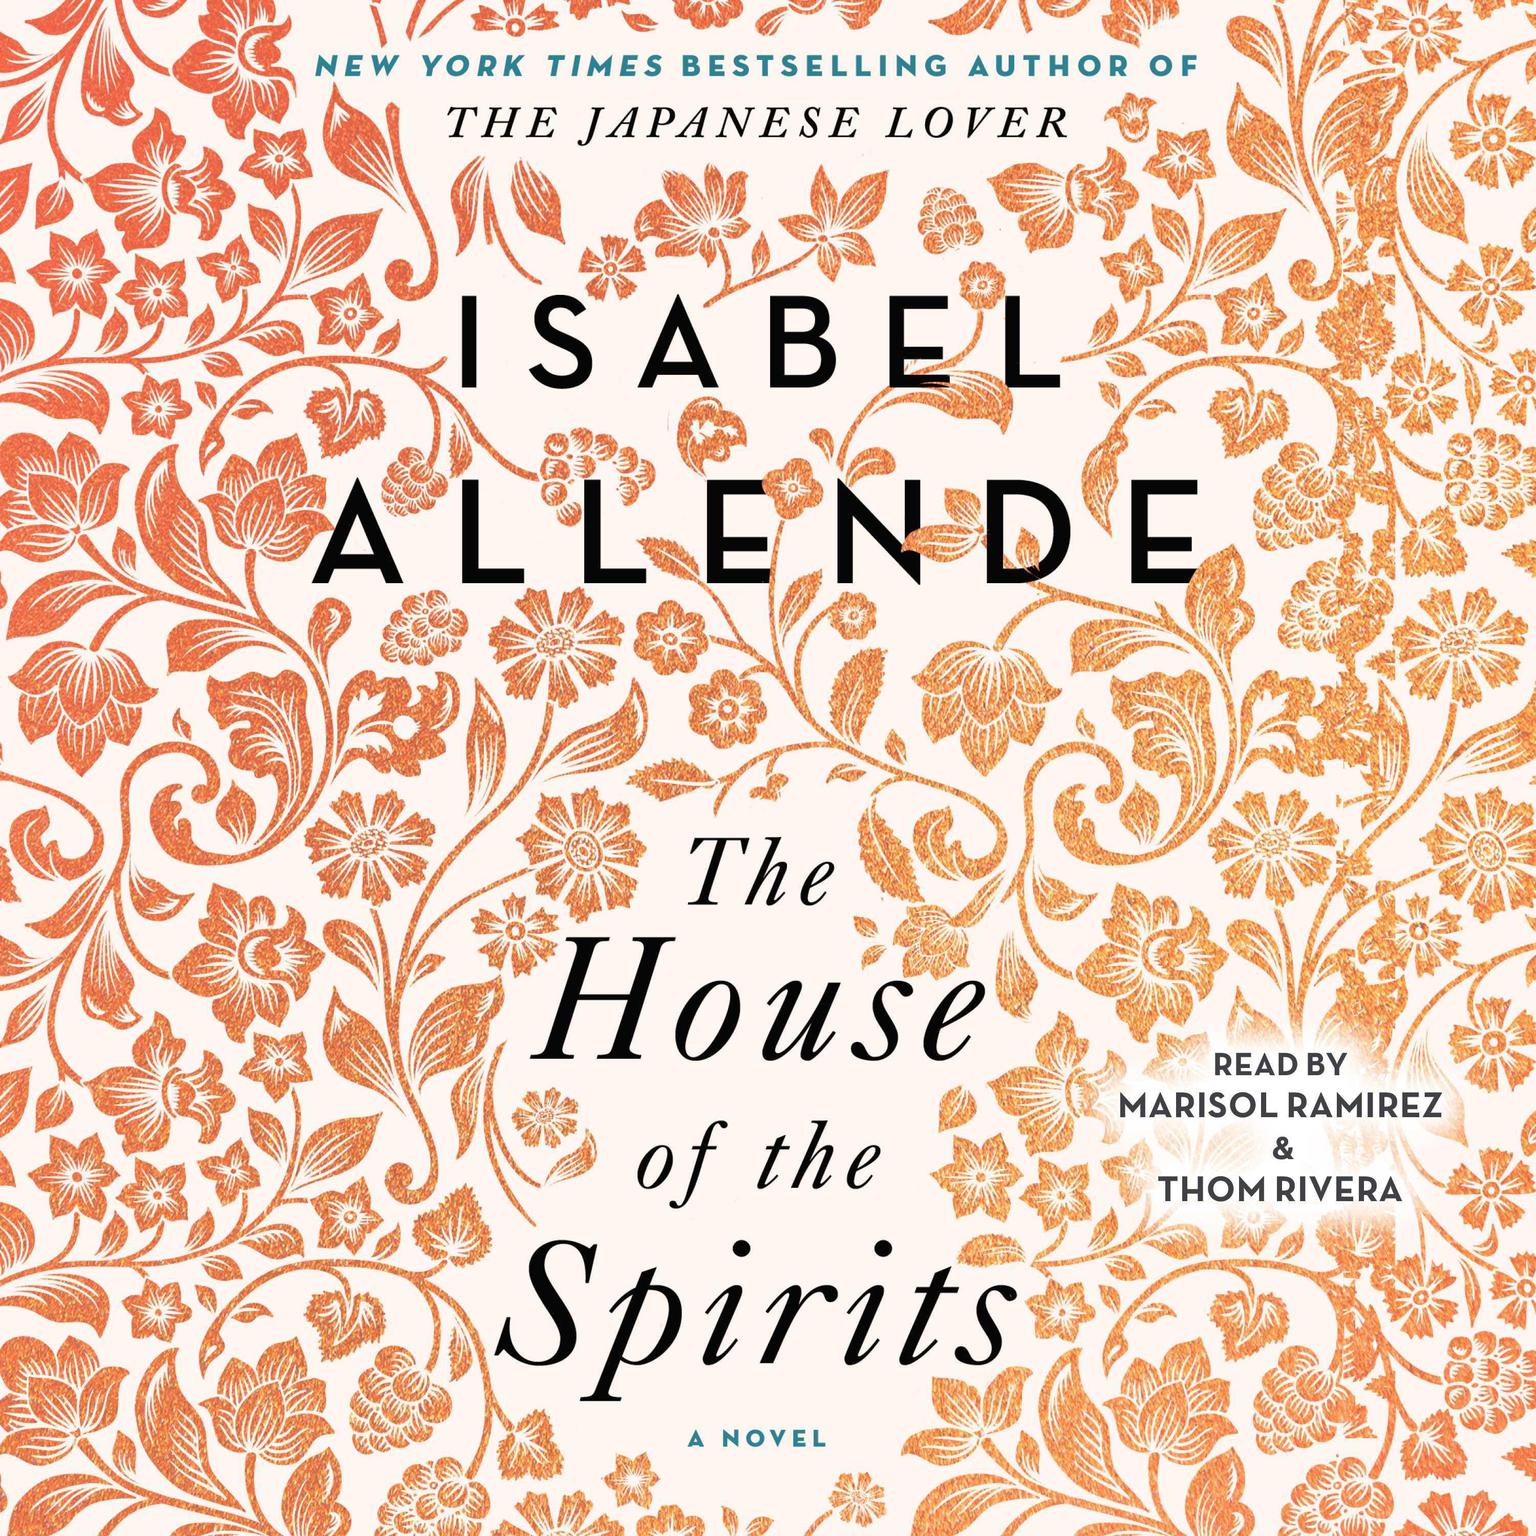 The House of the Spirits: A Novel Audiobook, by Isabel Allende